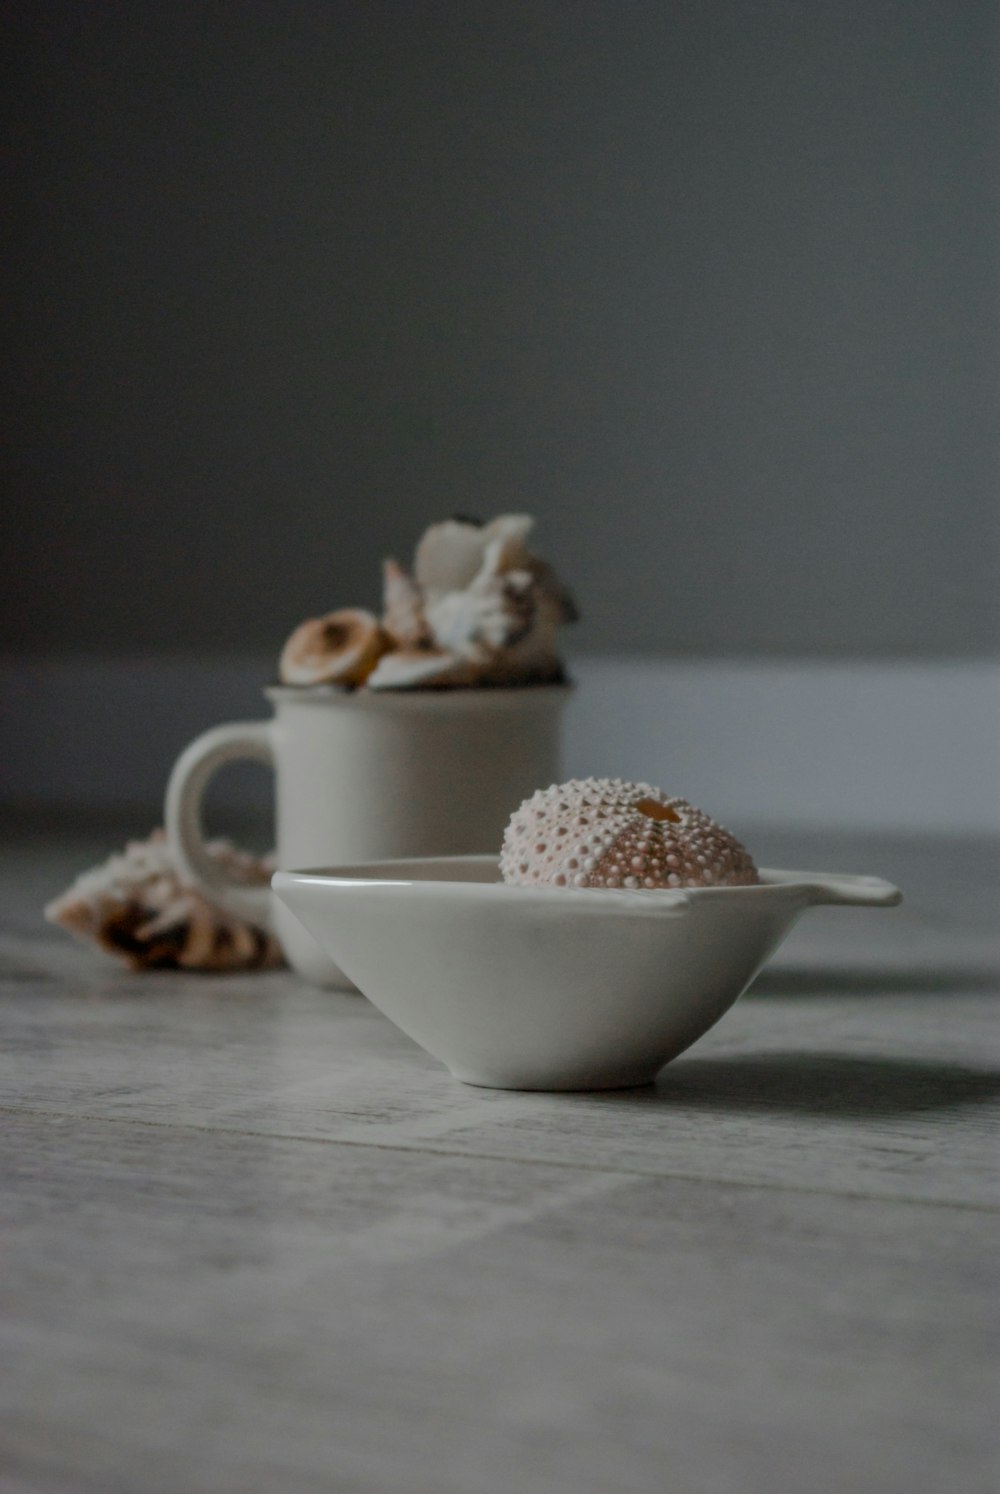 white ceramic teacup with brown and white beads on white ceramic saucer